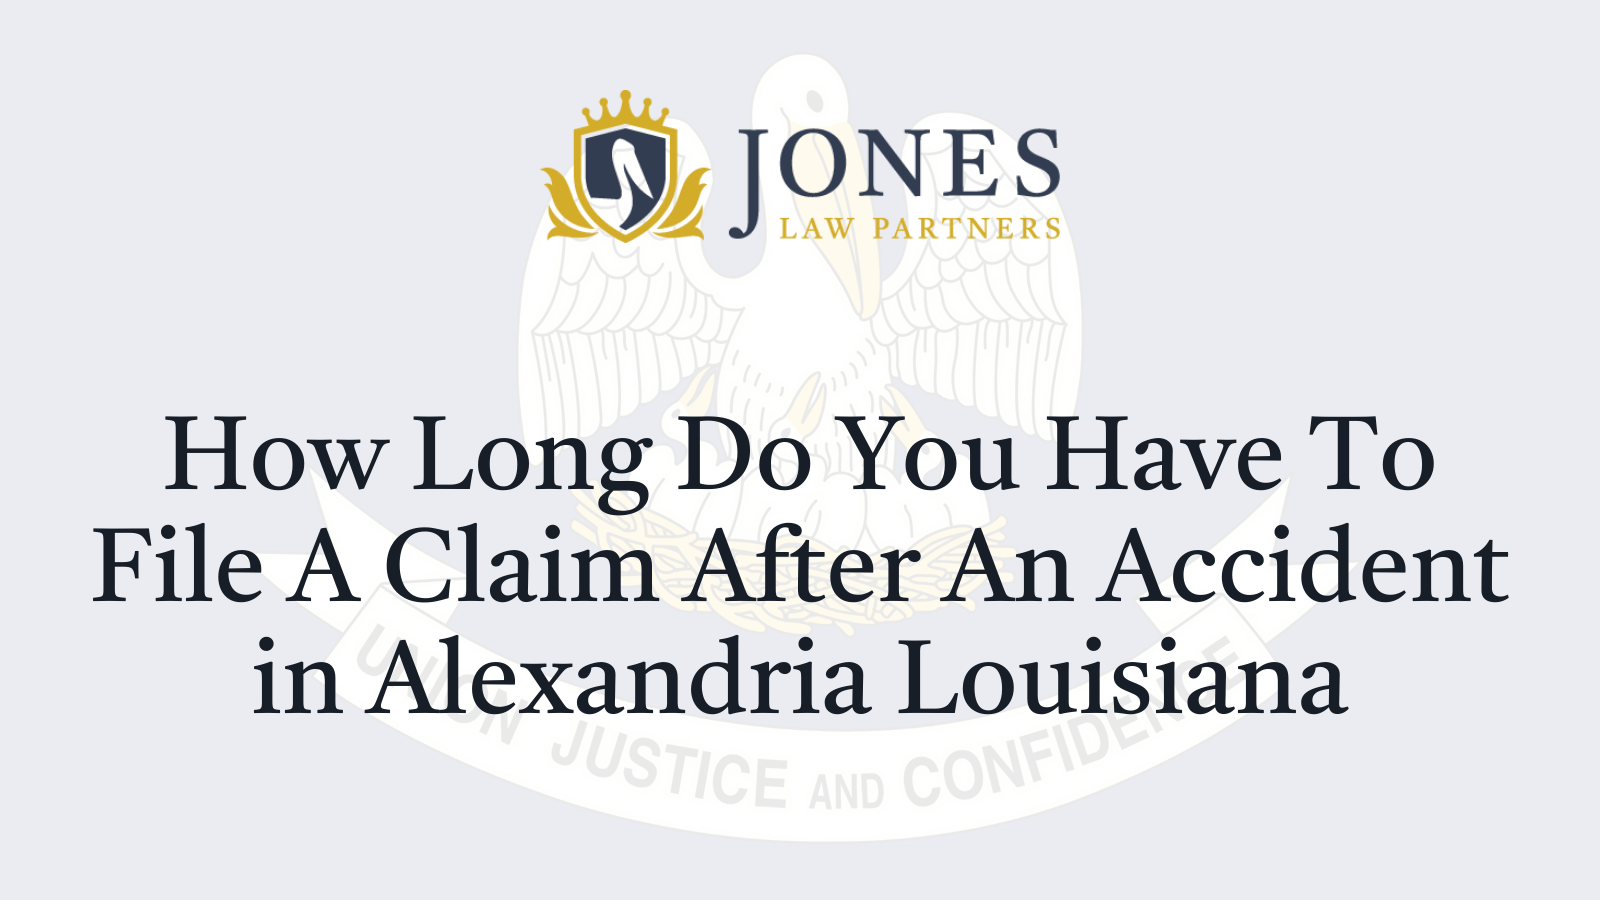 How Long Do You Have To File A Claim After An Accident in Alexandria Louisiana - Jones Law Partners